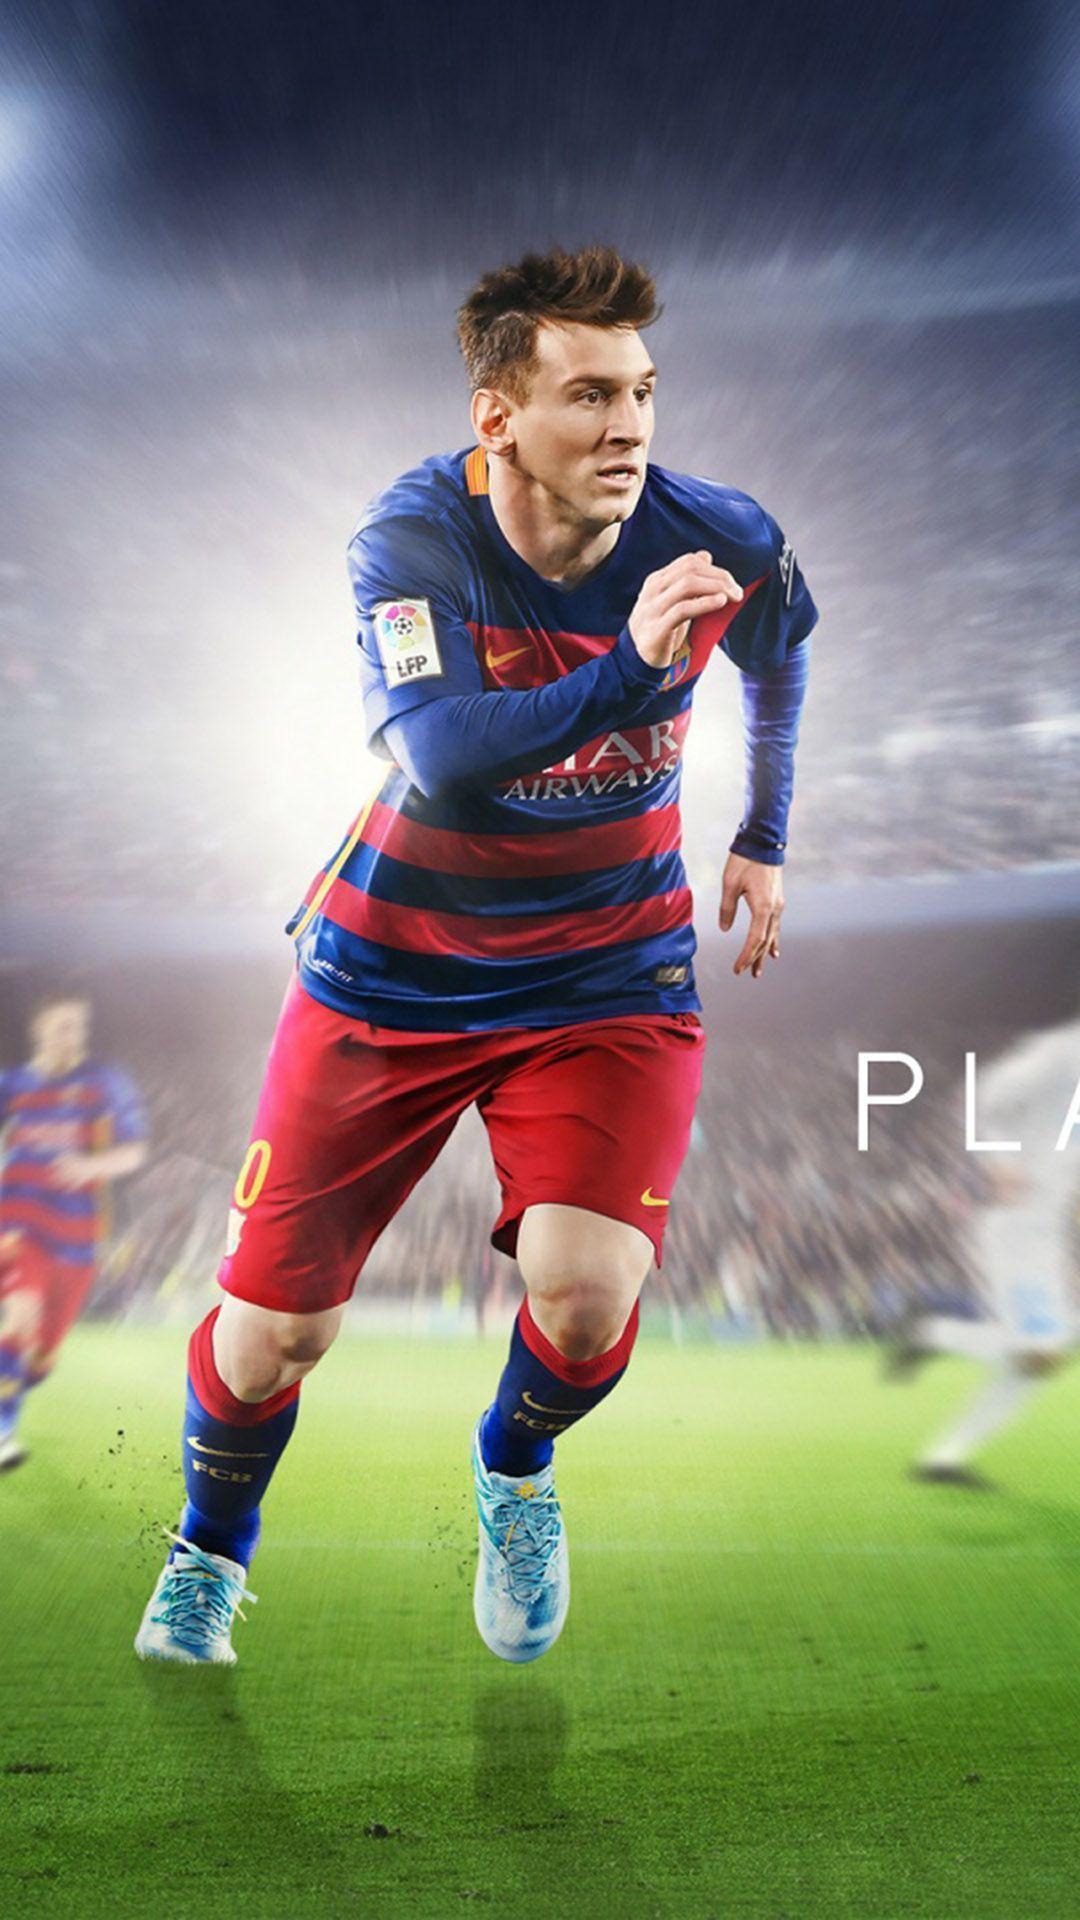 Lionel Messi Image for iPhone 6s